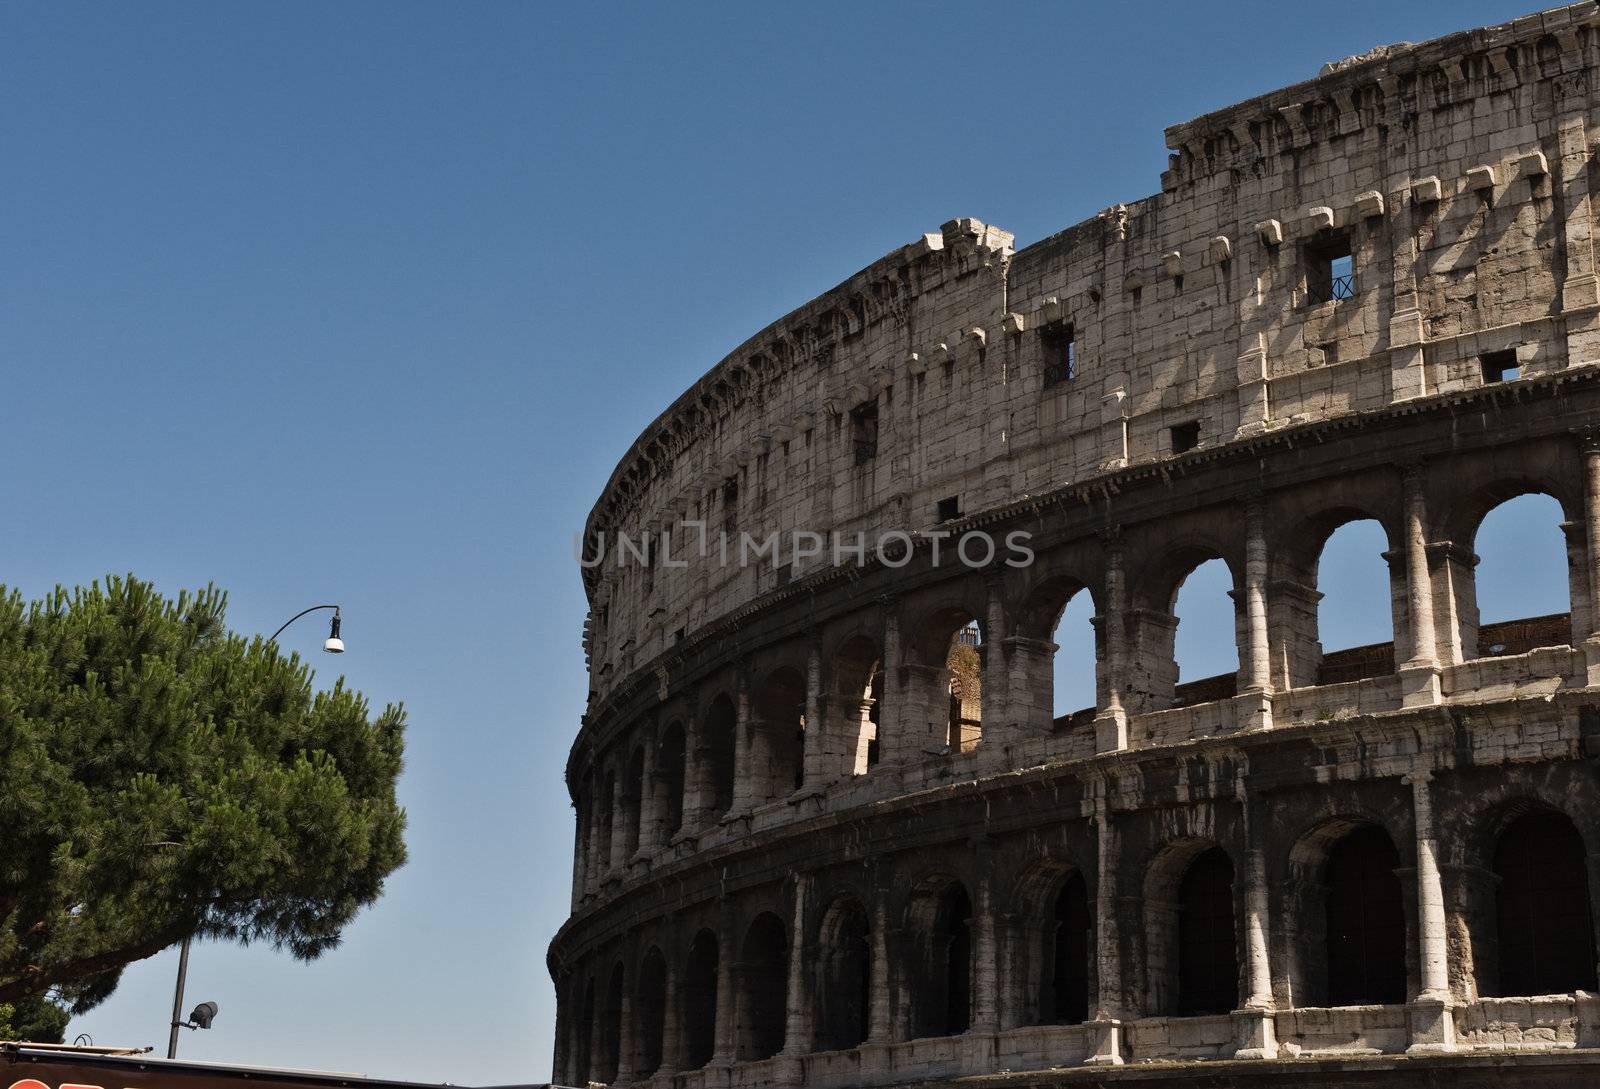 Street view of the Colosseum ion the centre of Rome, Italy